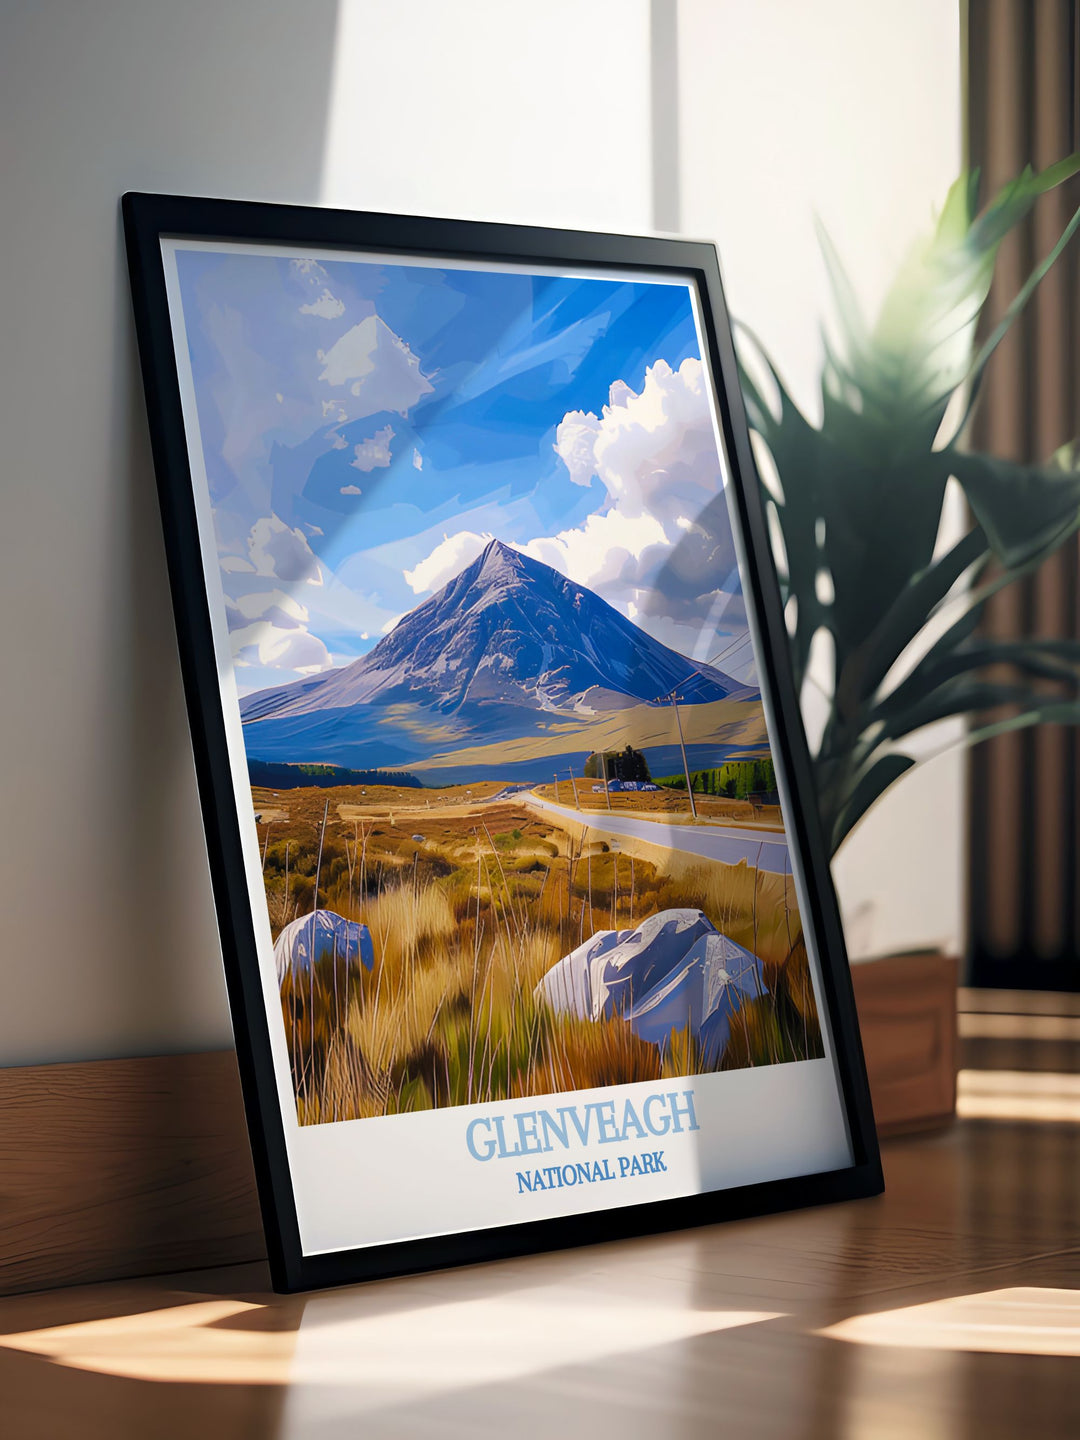 Home decor print featuring Mount Errigal in Glenveagh National Park, showcasing the scenic views and rugged beauty of Ireland, a wonderful addition for any room.